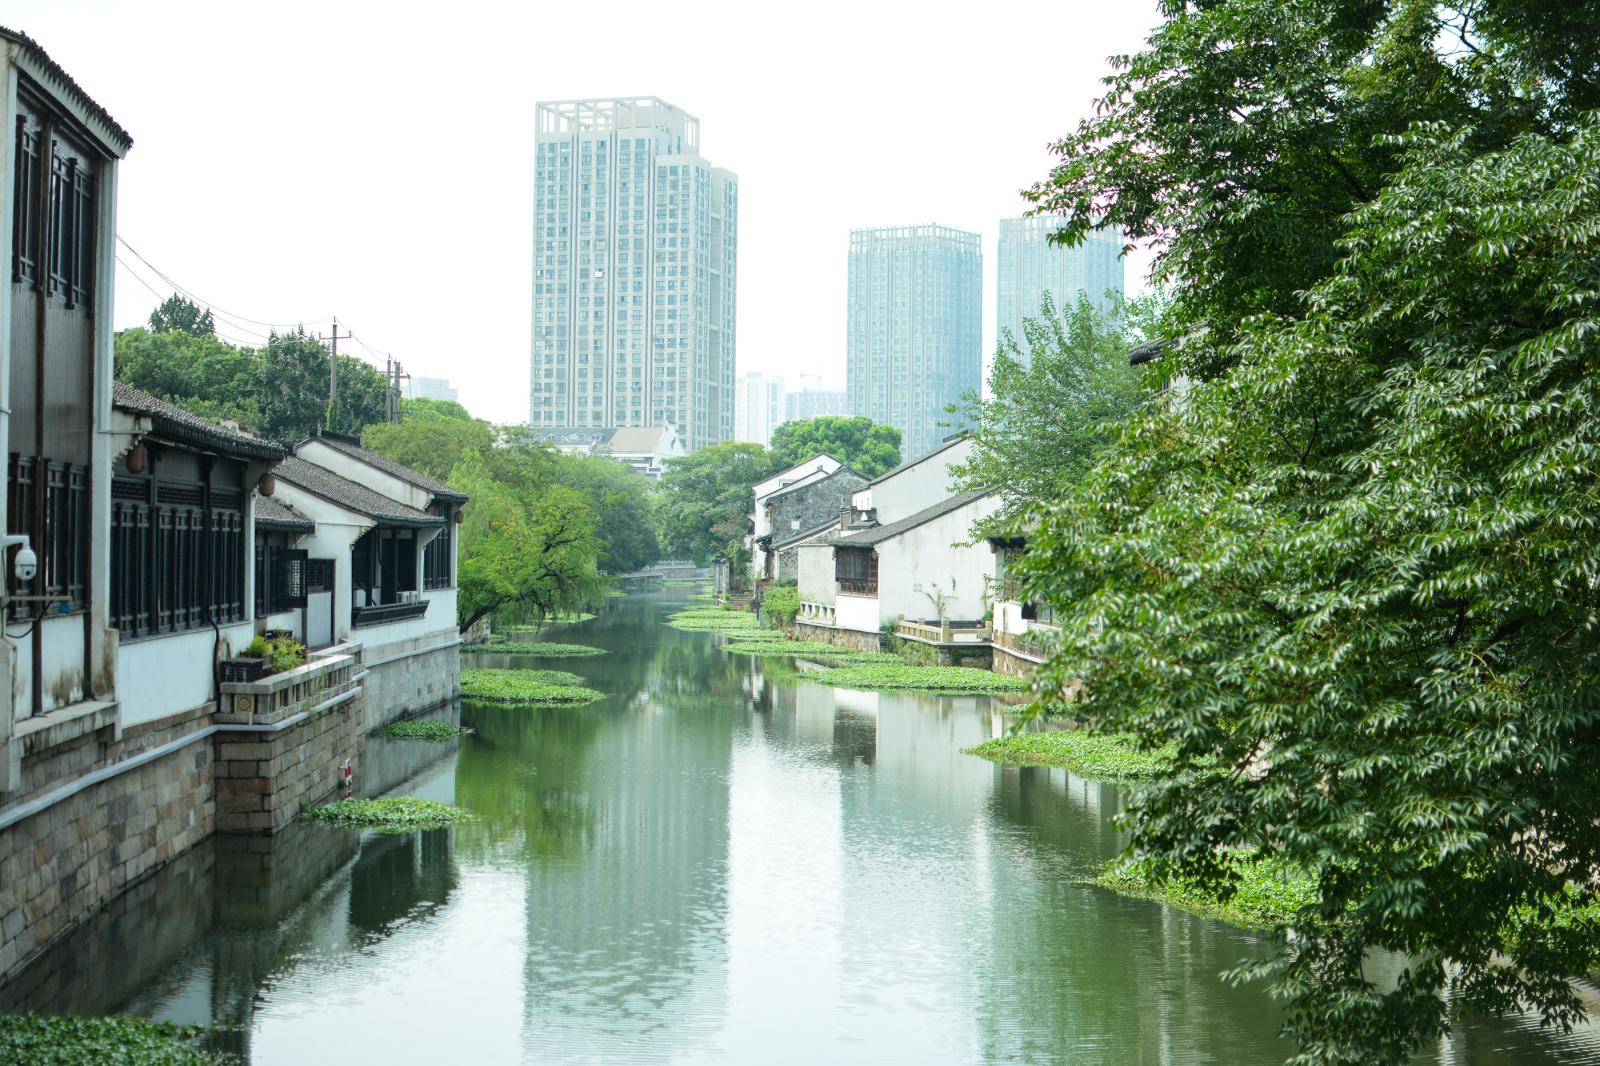 Qing Guo Alley is in the heart ... of the oldest canals in China.